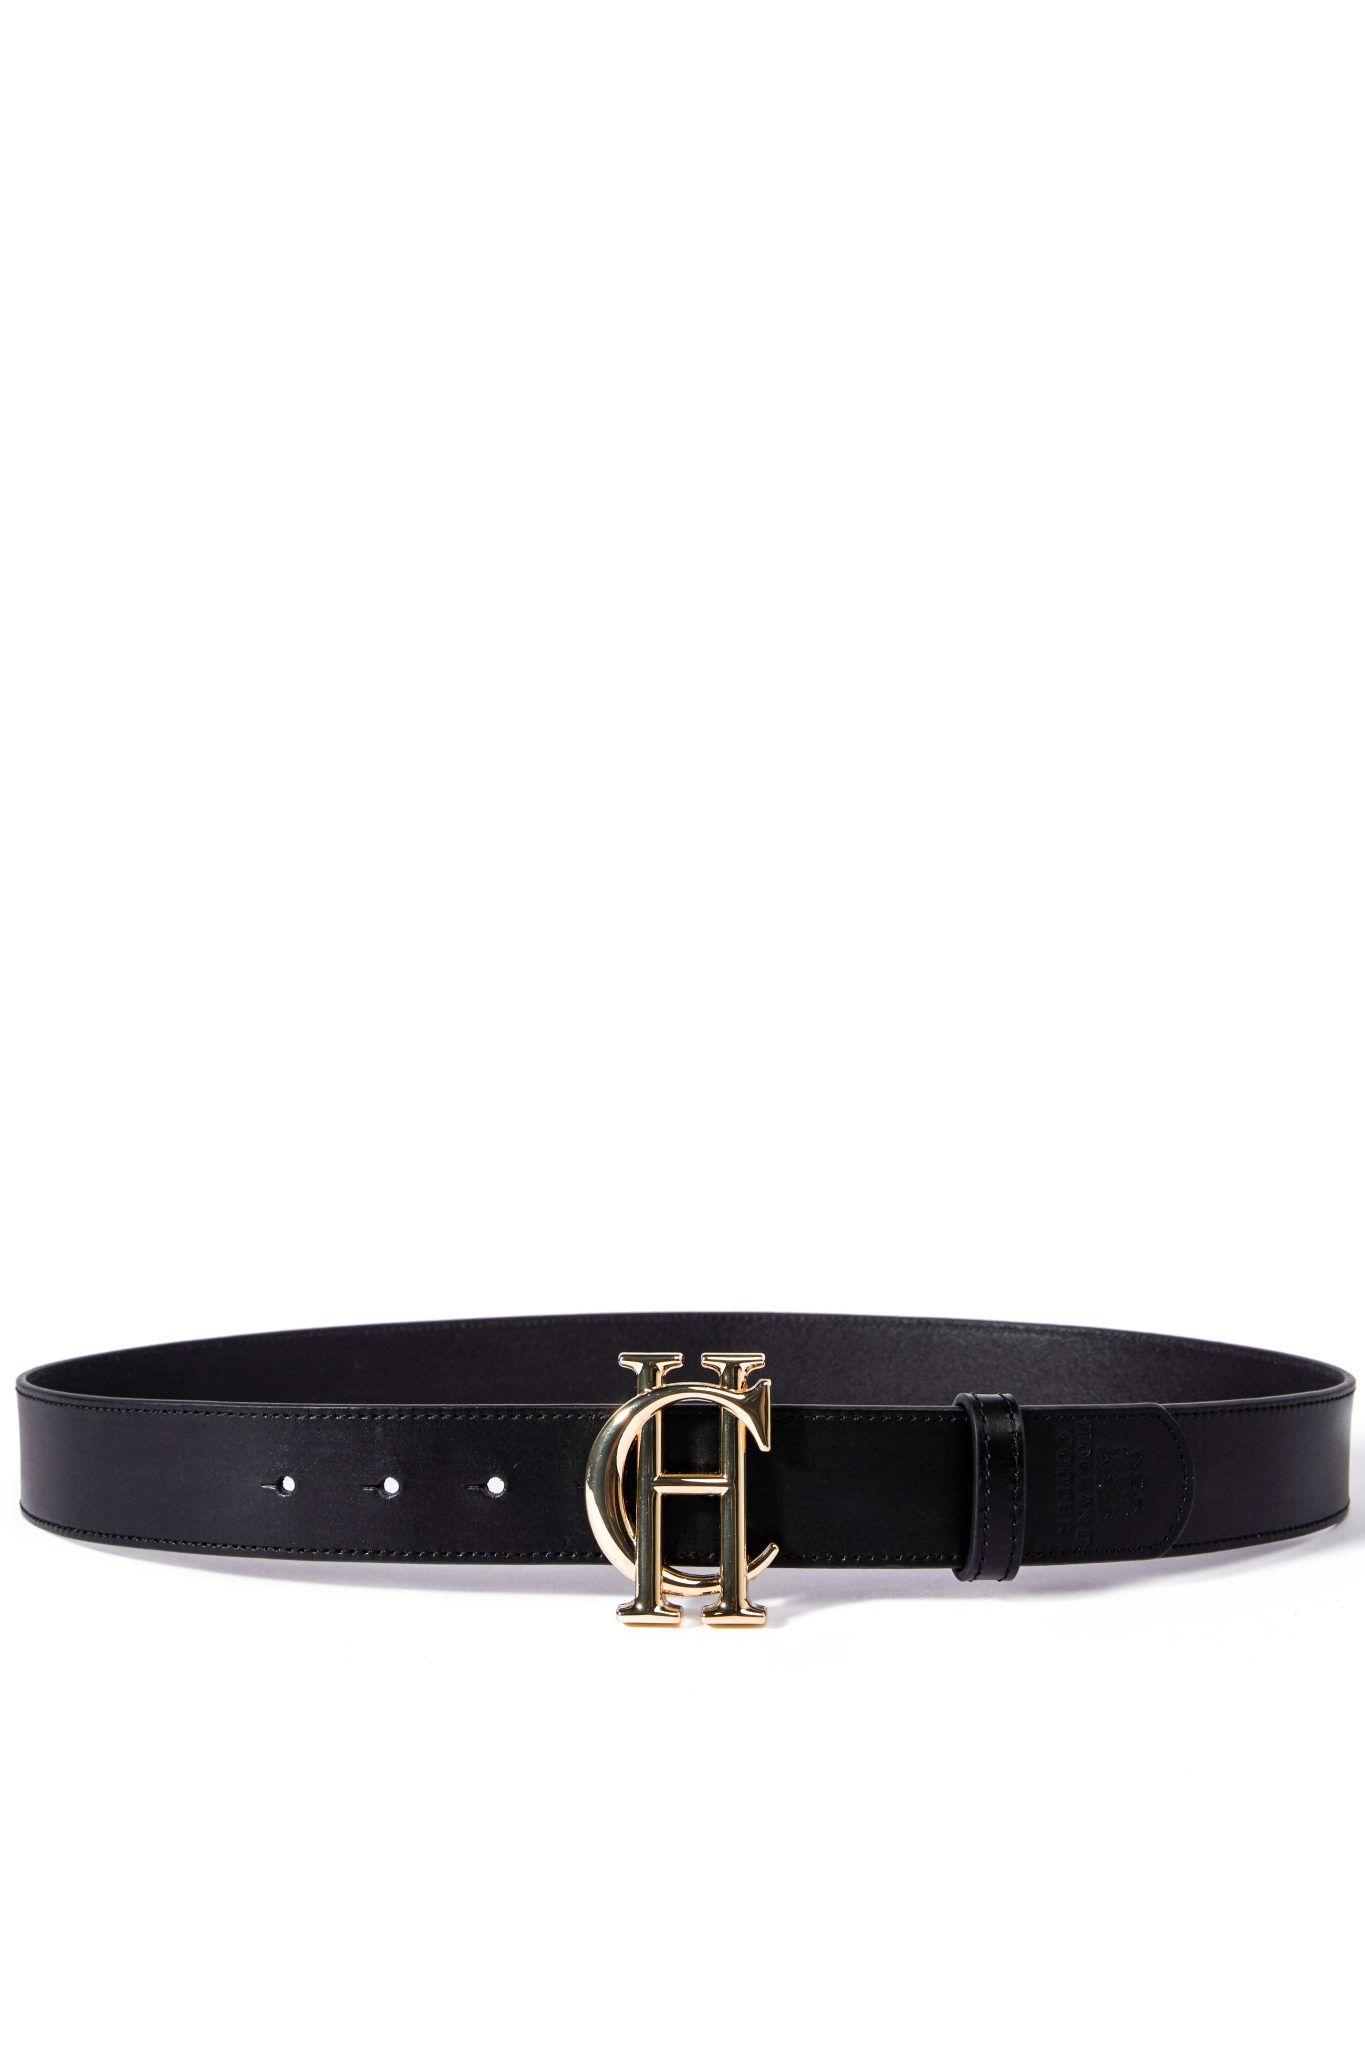 Holland Cooper Classic Belt - Black / Gold - Ruffords Country Store